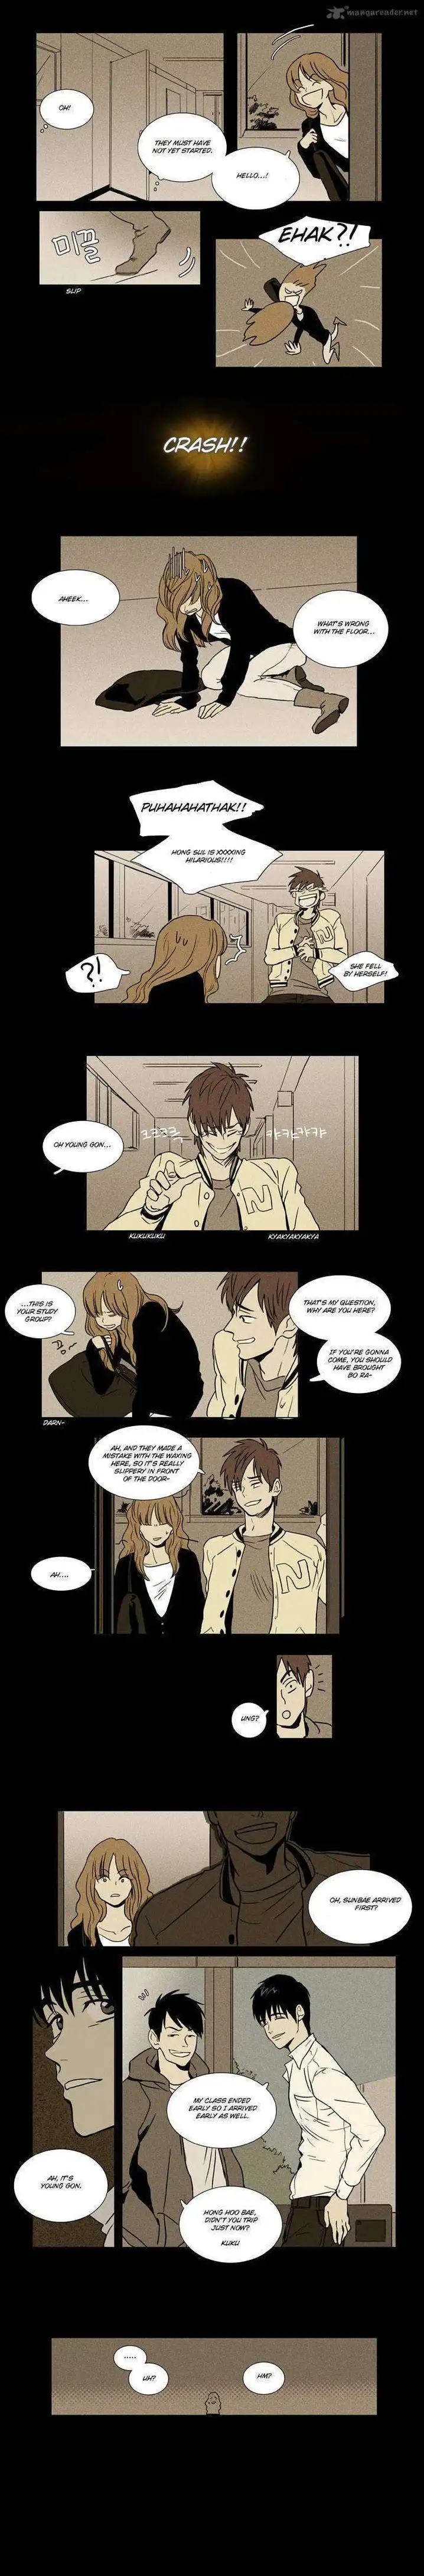 Cheese In The Trap - Chapter 7 Page 2